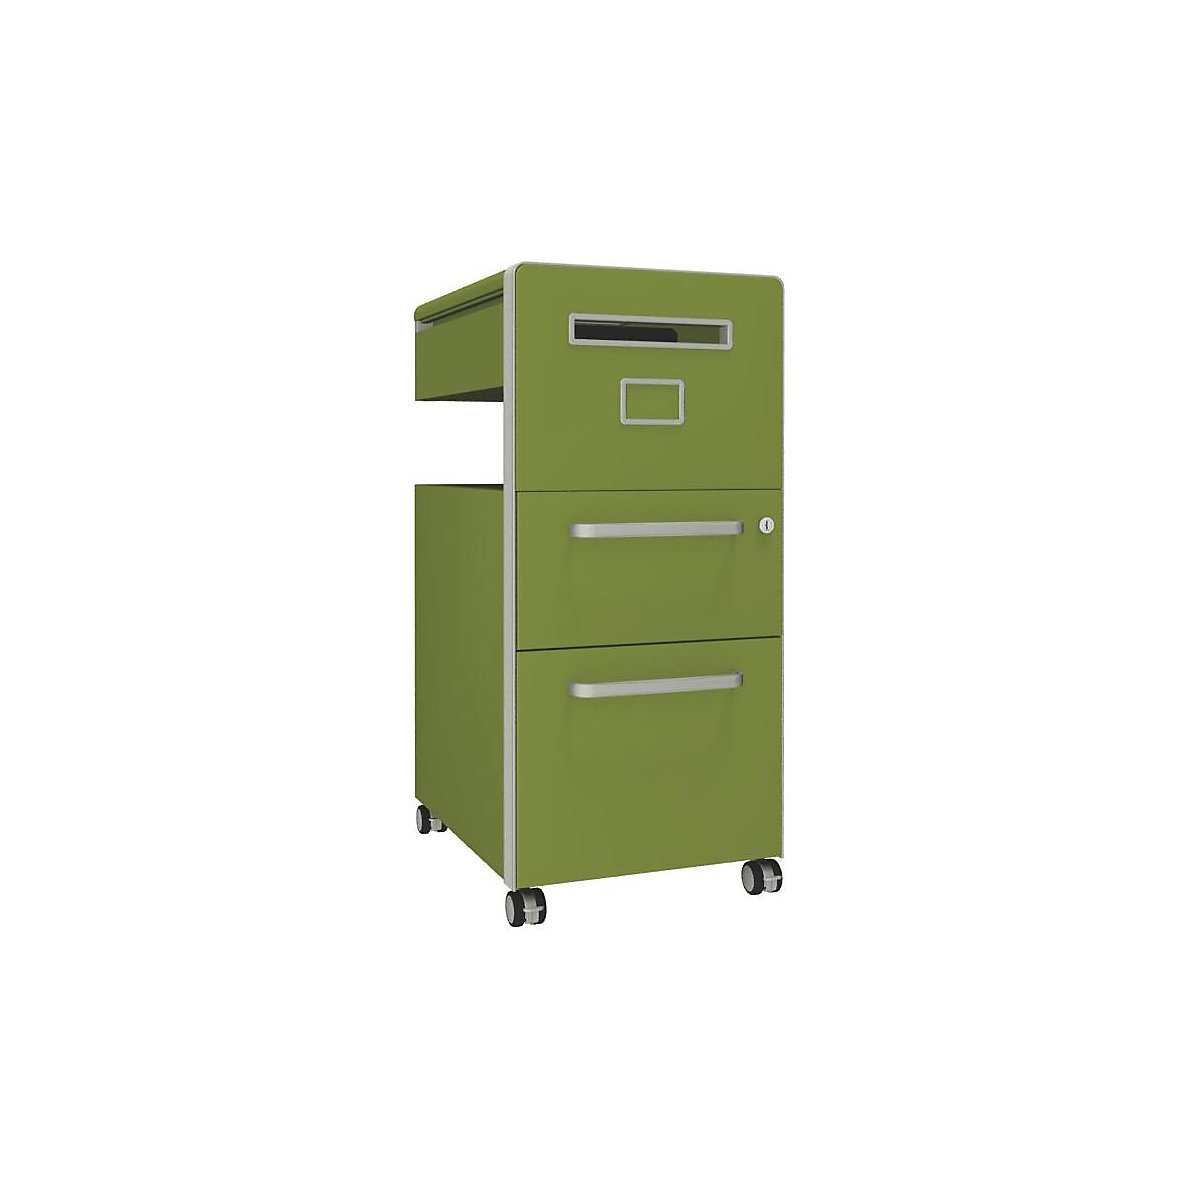 Bite™ pedestal furniture, with 1 whiteboard, opens on the right side – BISLEY, with 1 universal drawer, 1 suspension file drawer, green-10